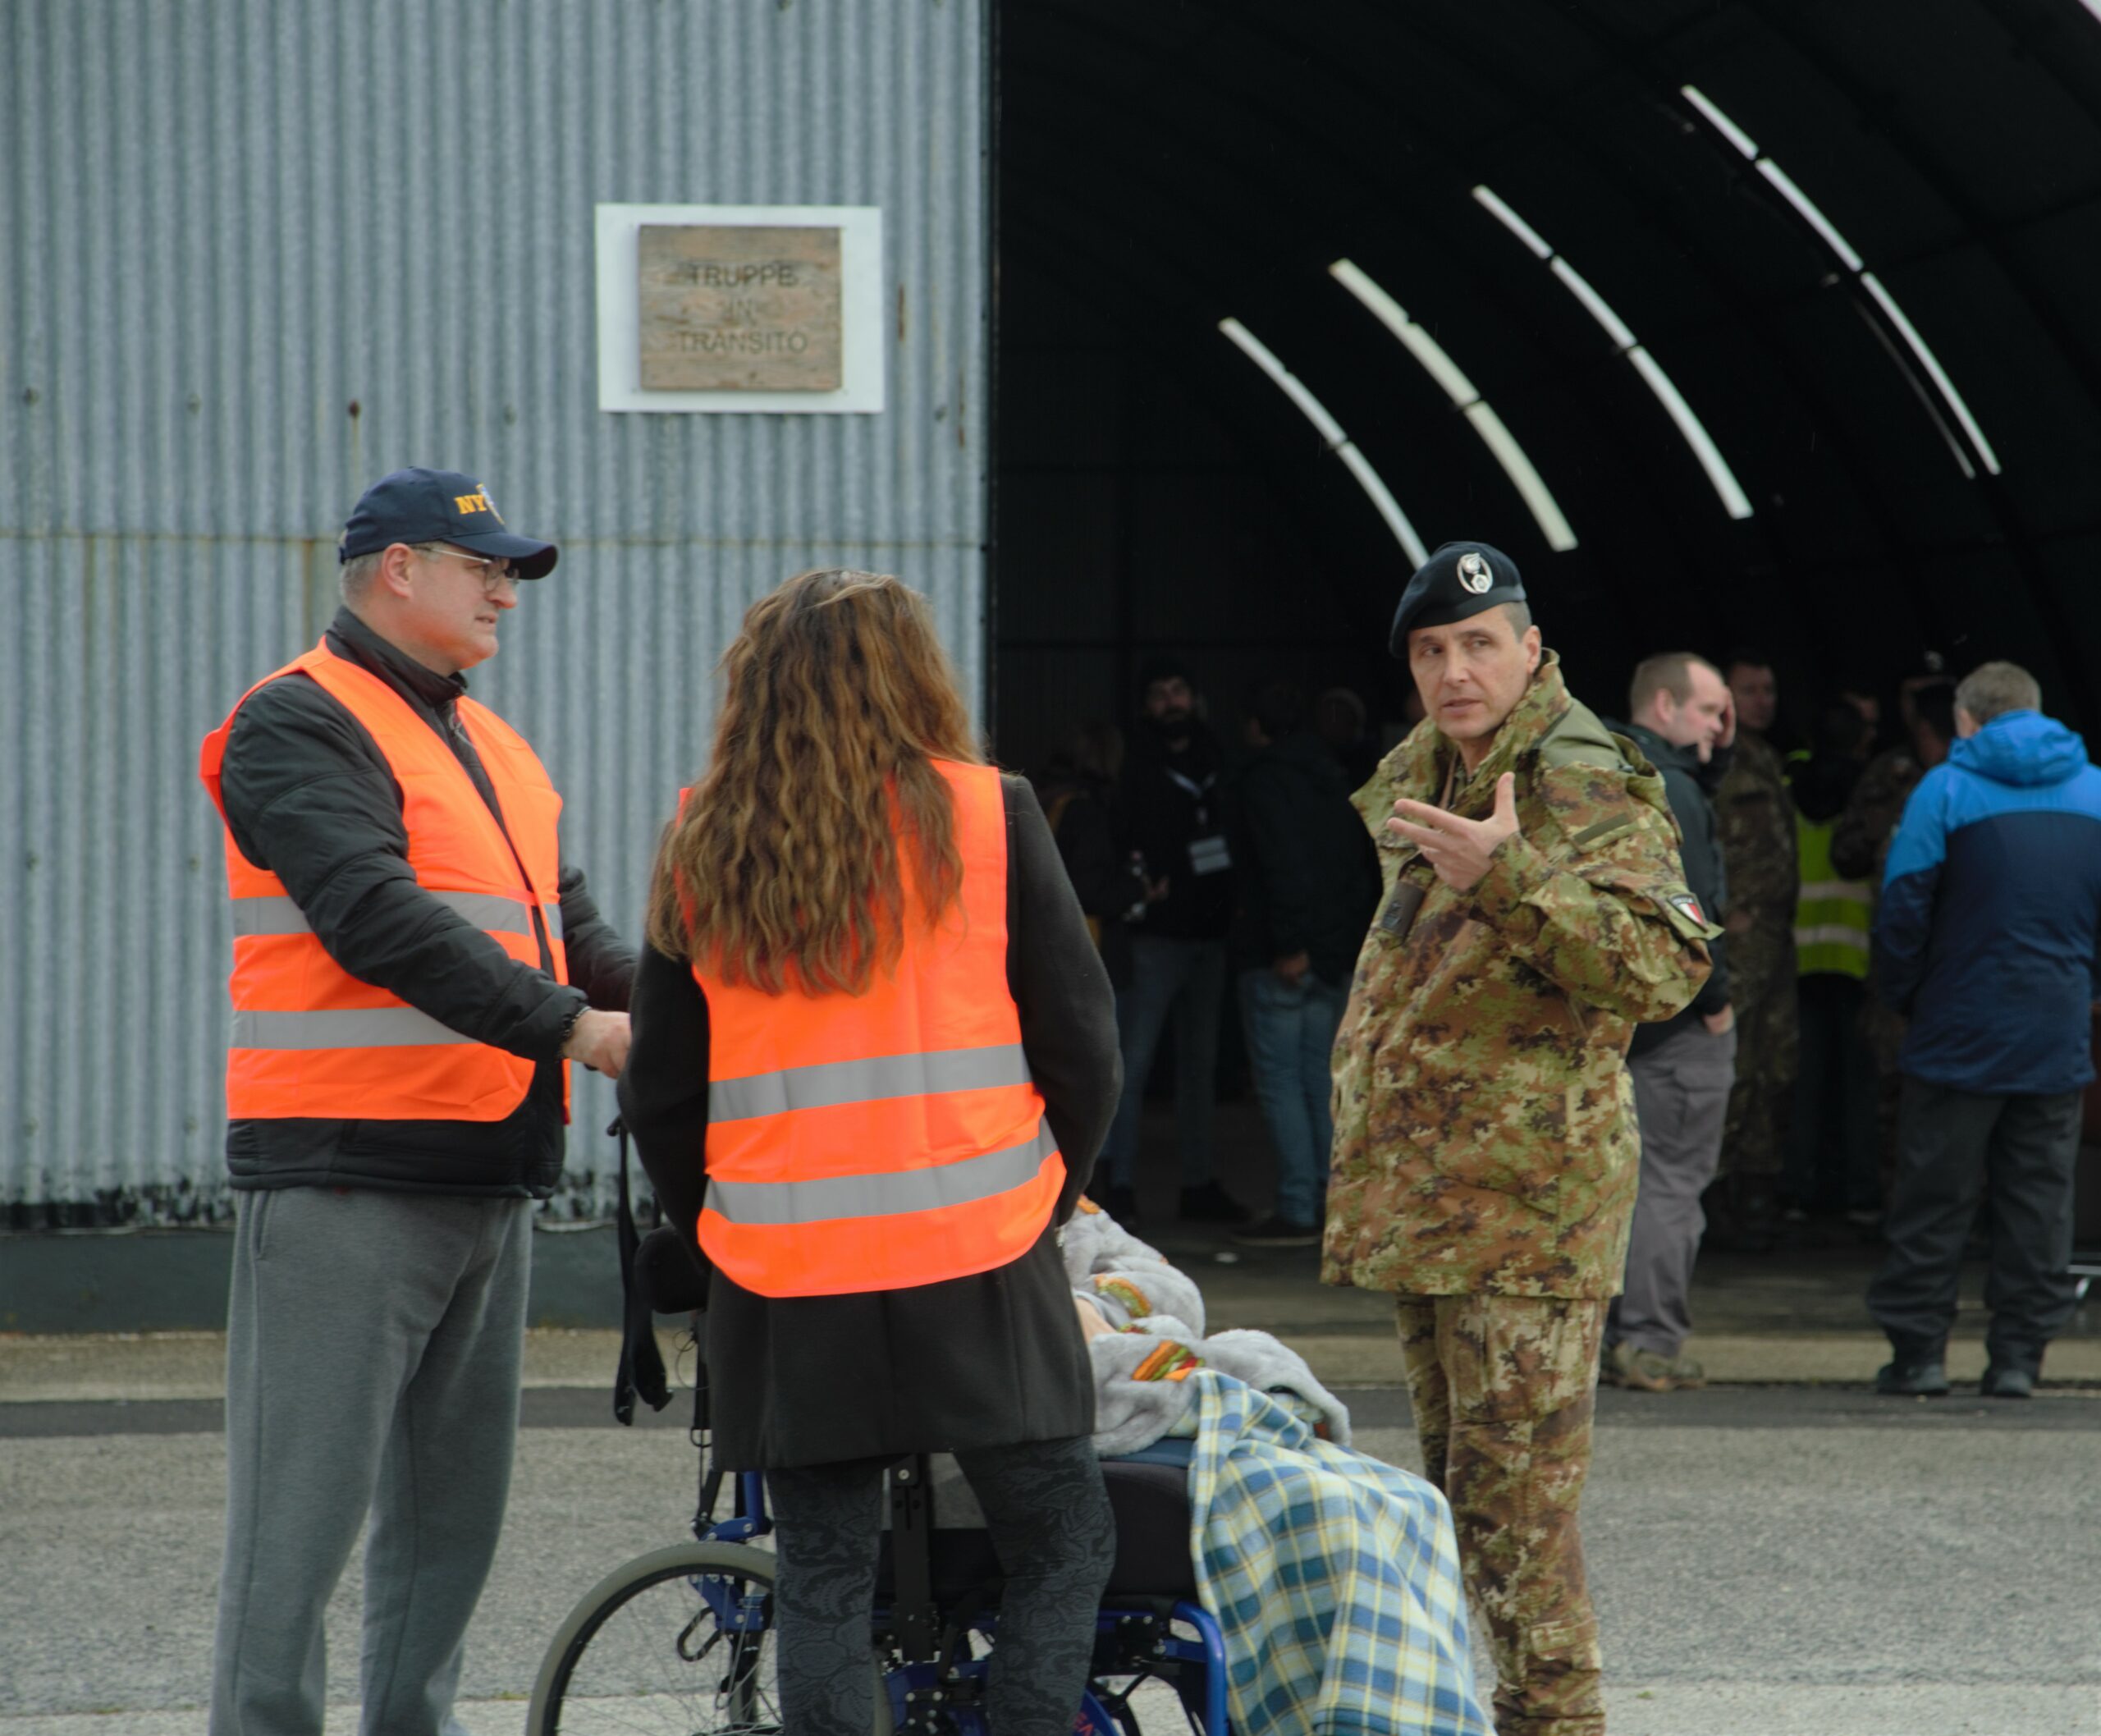 Three people in the front of photo are standing and discussing. One of them is in an army uniform explaining something. A man wearing an orange tabard is holding wheelchair. A woman in an orange tabard is standing with back to the photo.